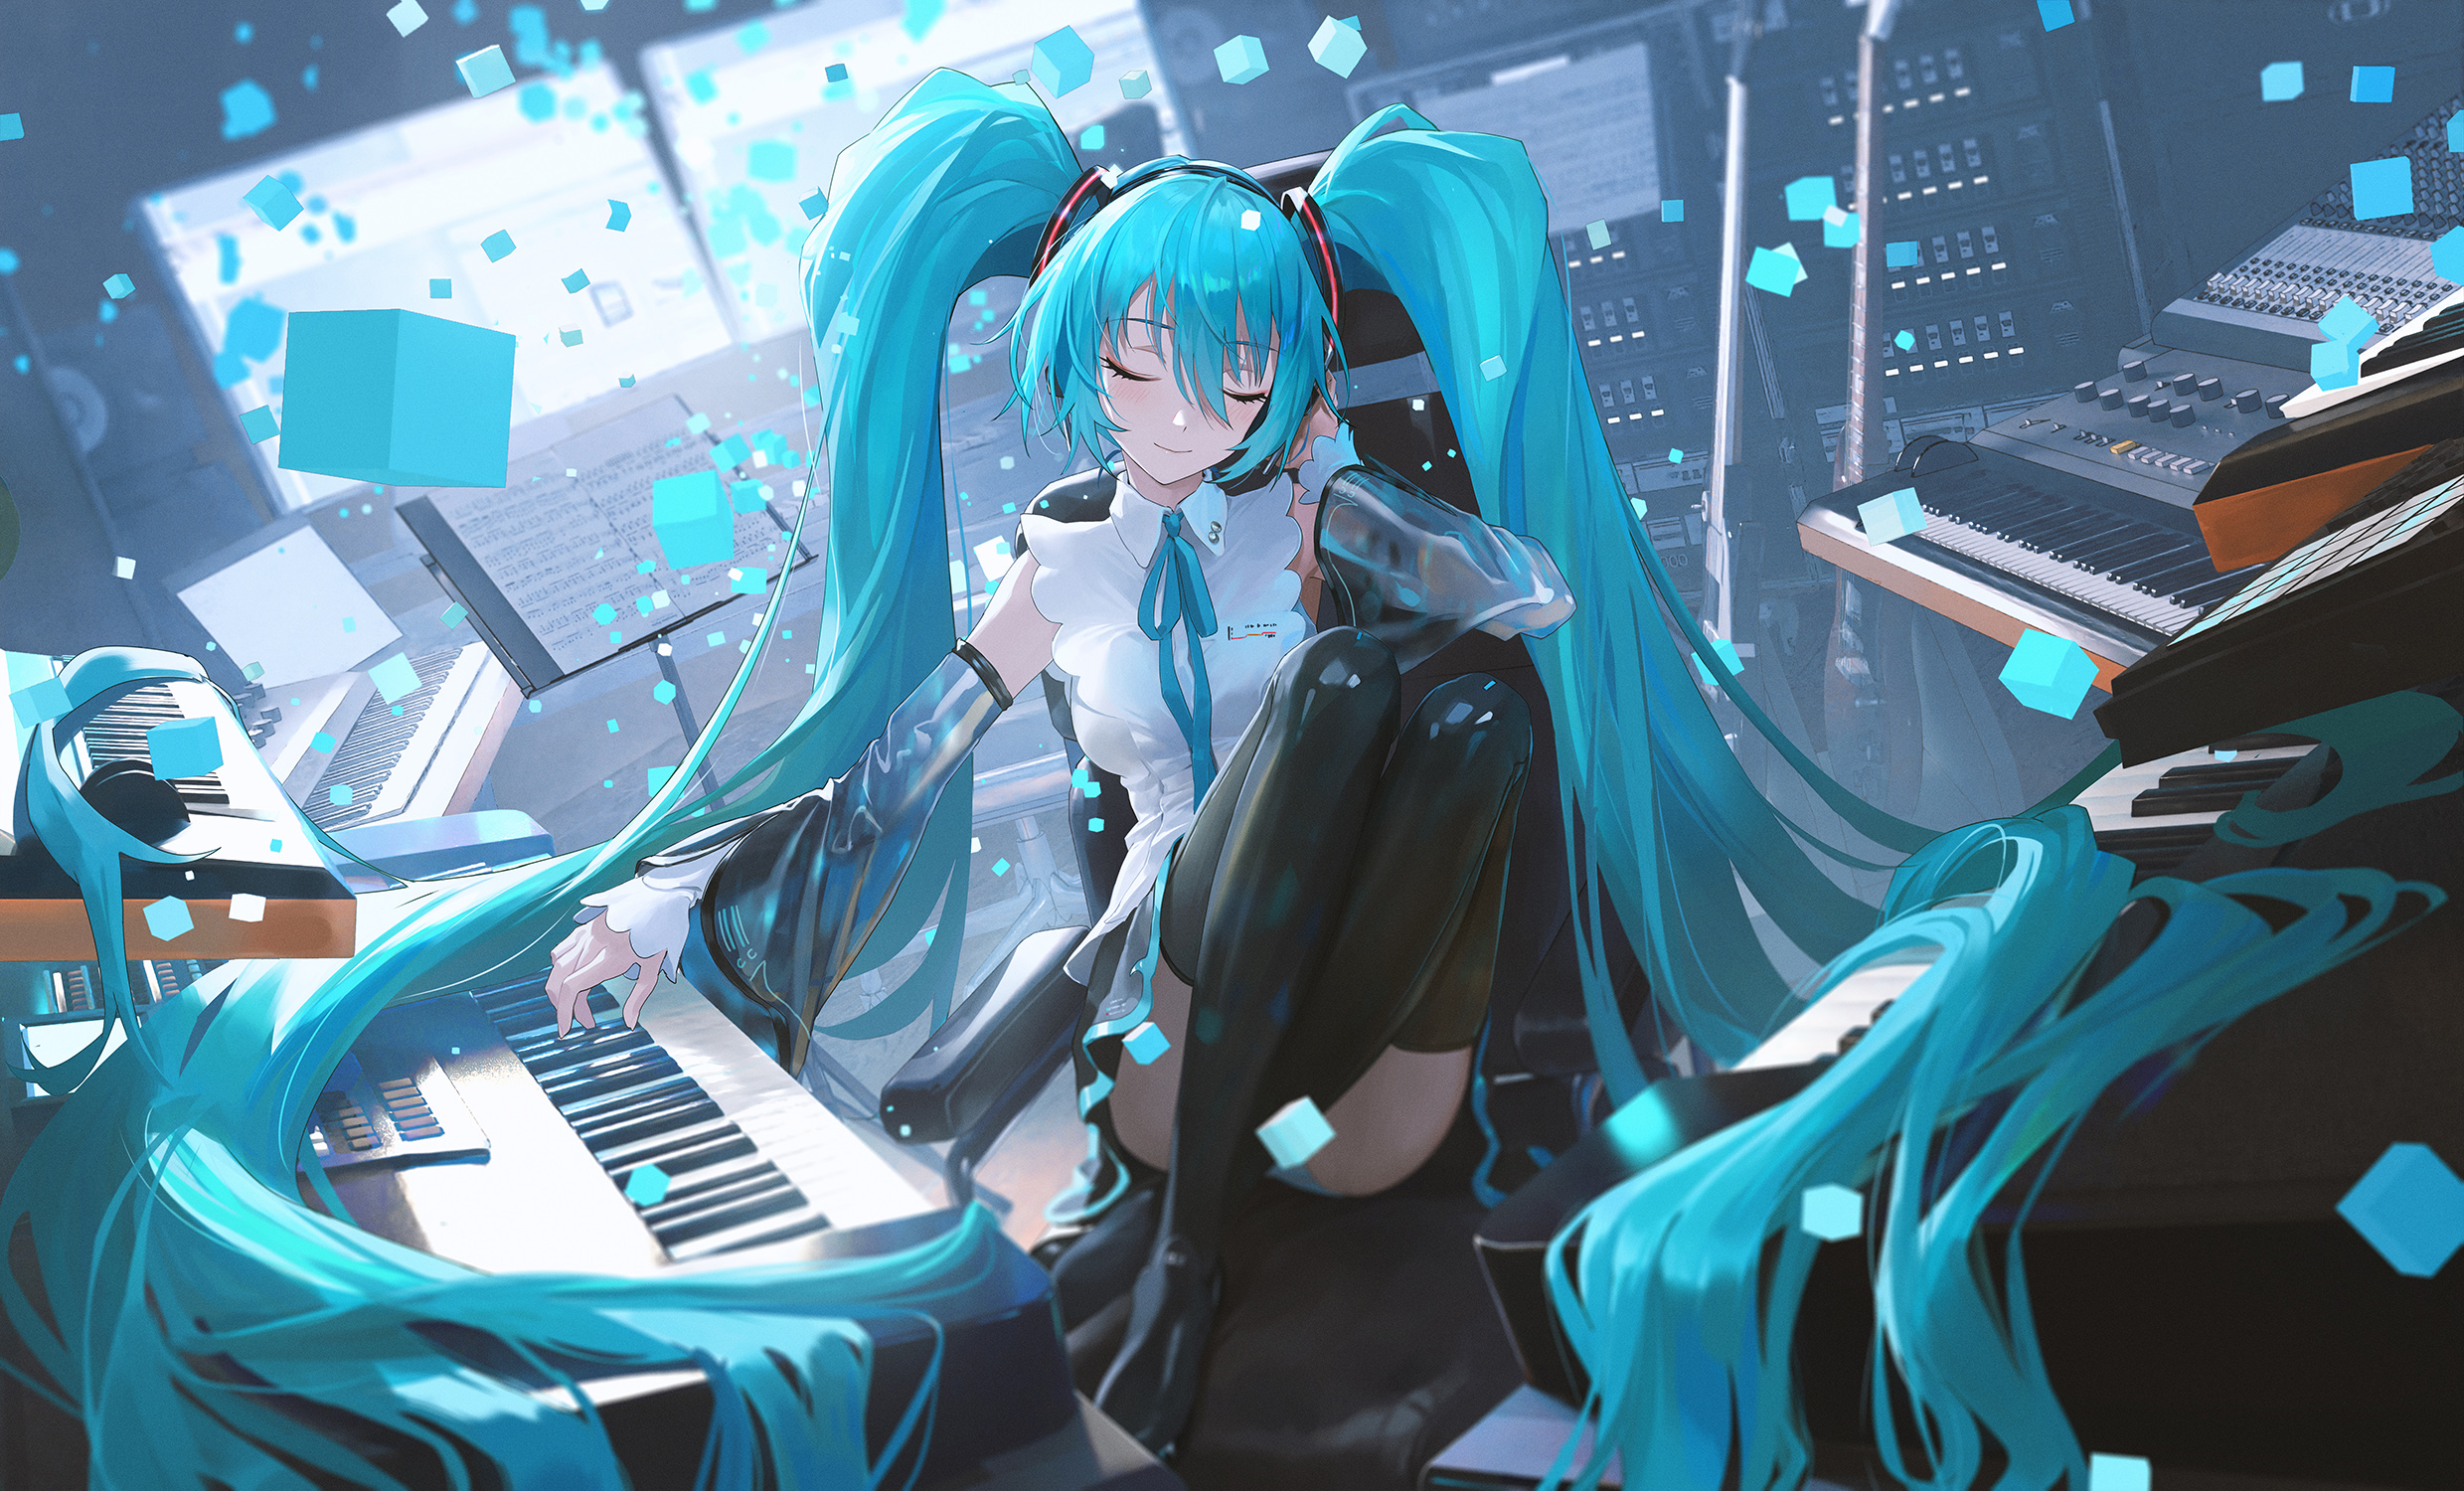 Anime 2479x1500 anime anime girls Vocaloid Hatsune Miku twintails closed eyes blue hair sitting long hair piano musical instrument paper cube headphones stockings smiling